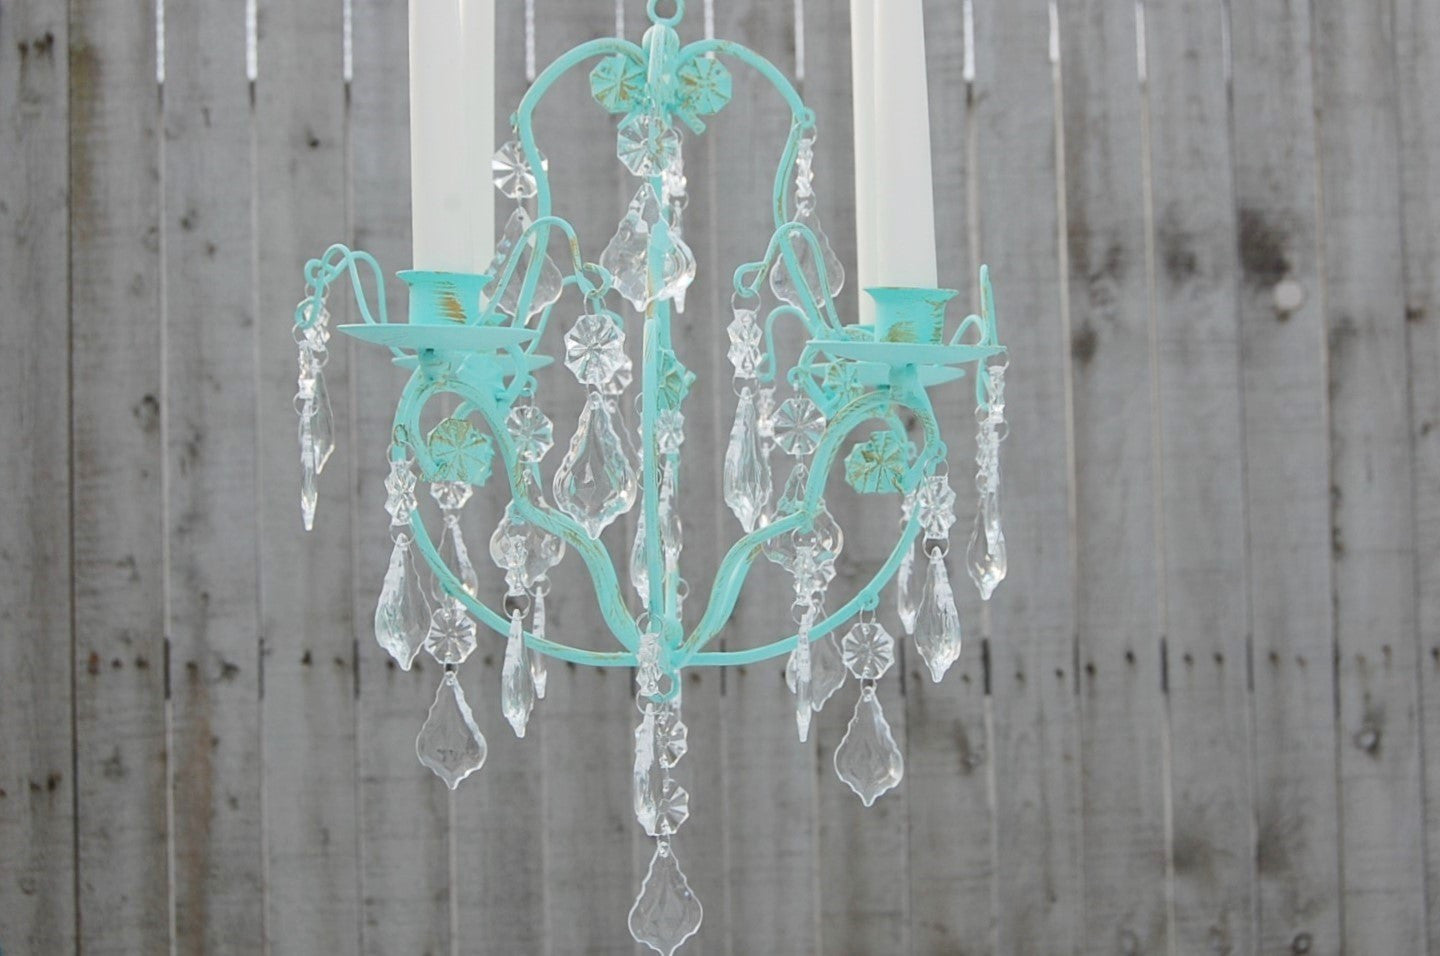 Mint Candle Chandelier - The Vintage Artistry